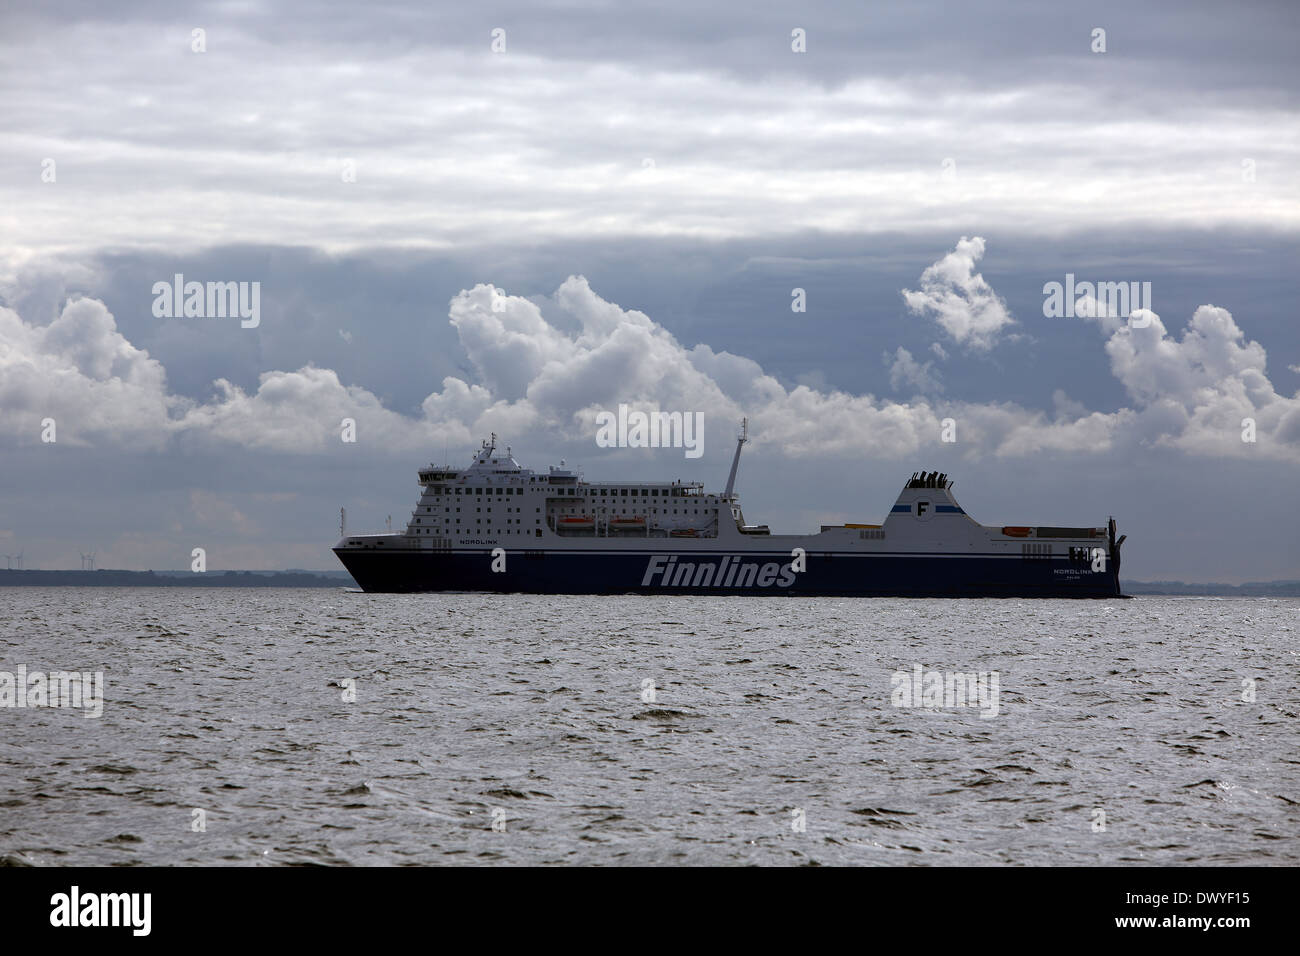 Wismar, Germany, the ferryboat Finnlines on the Baltic Sea Stock Photo